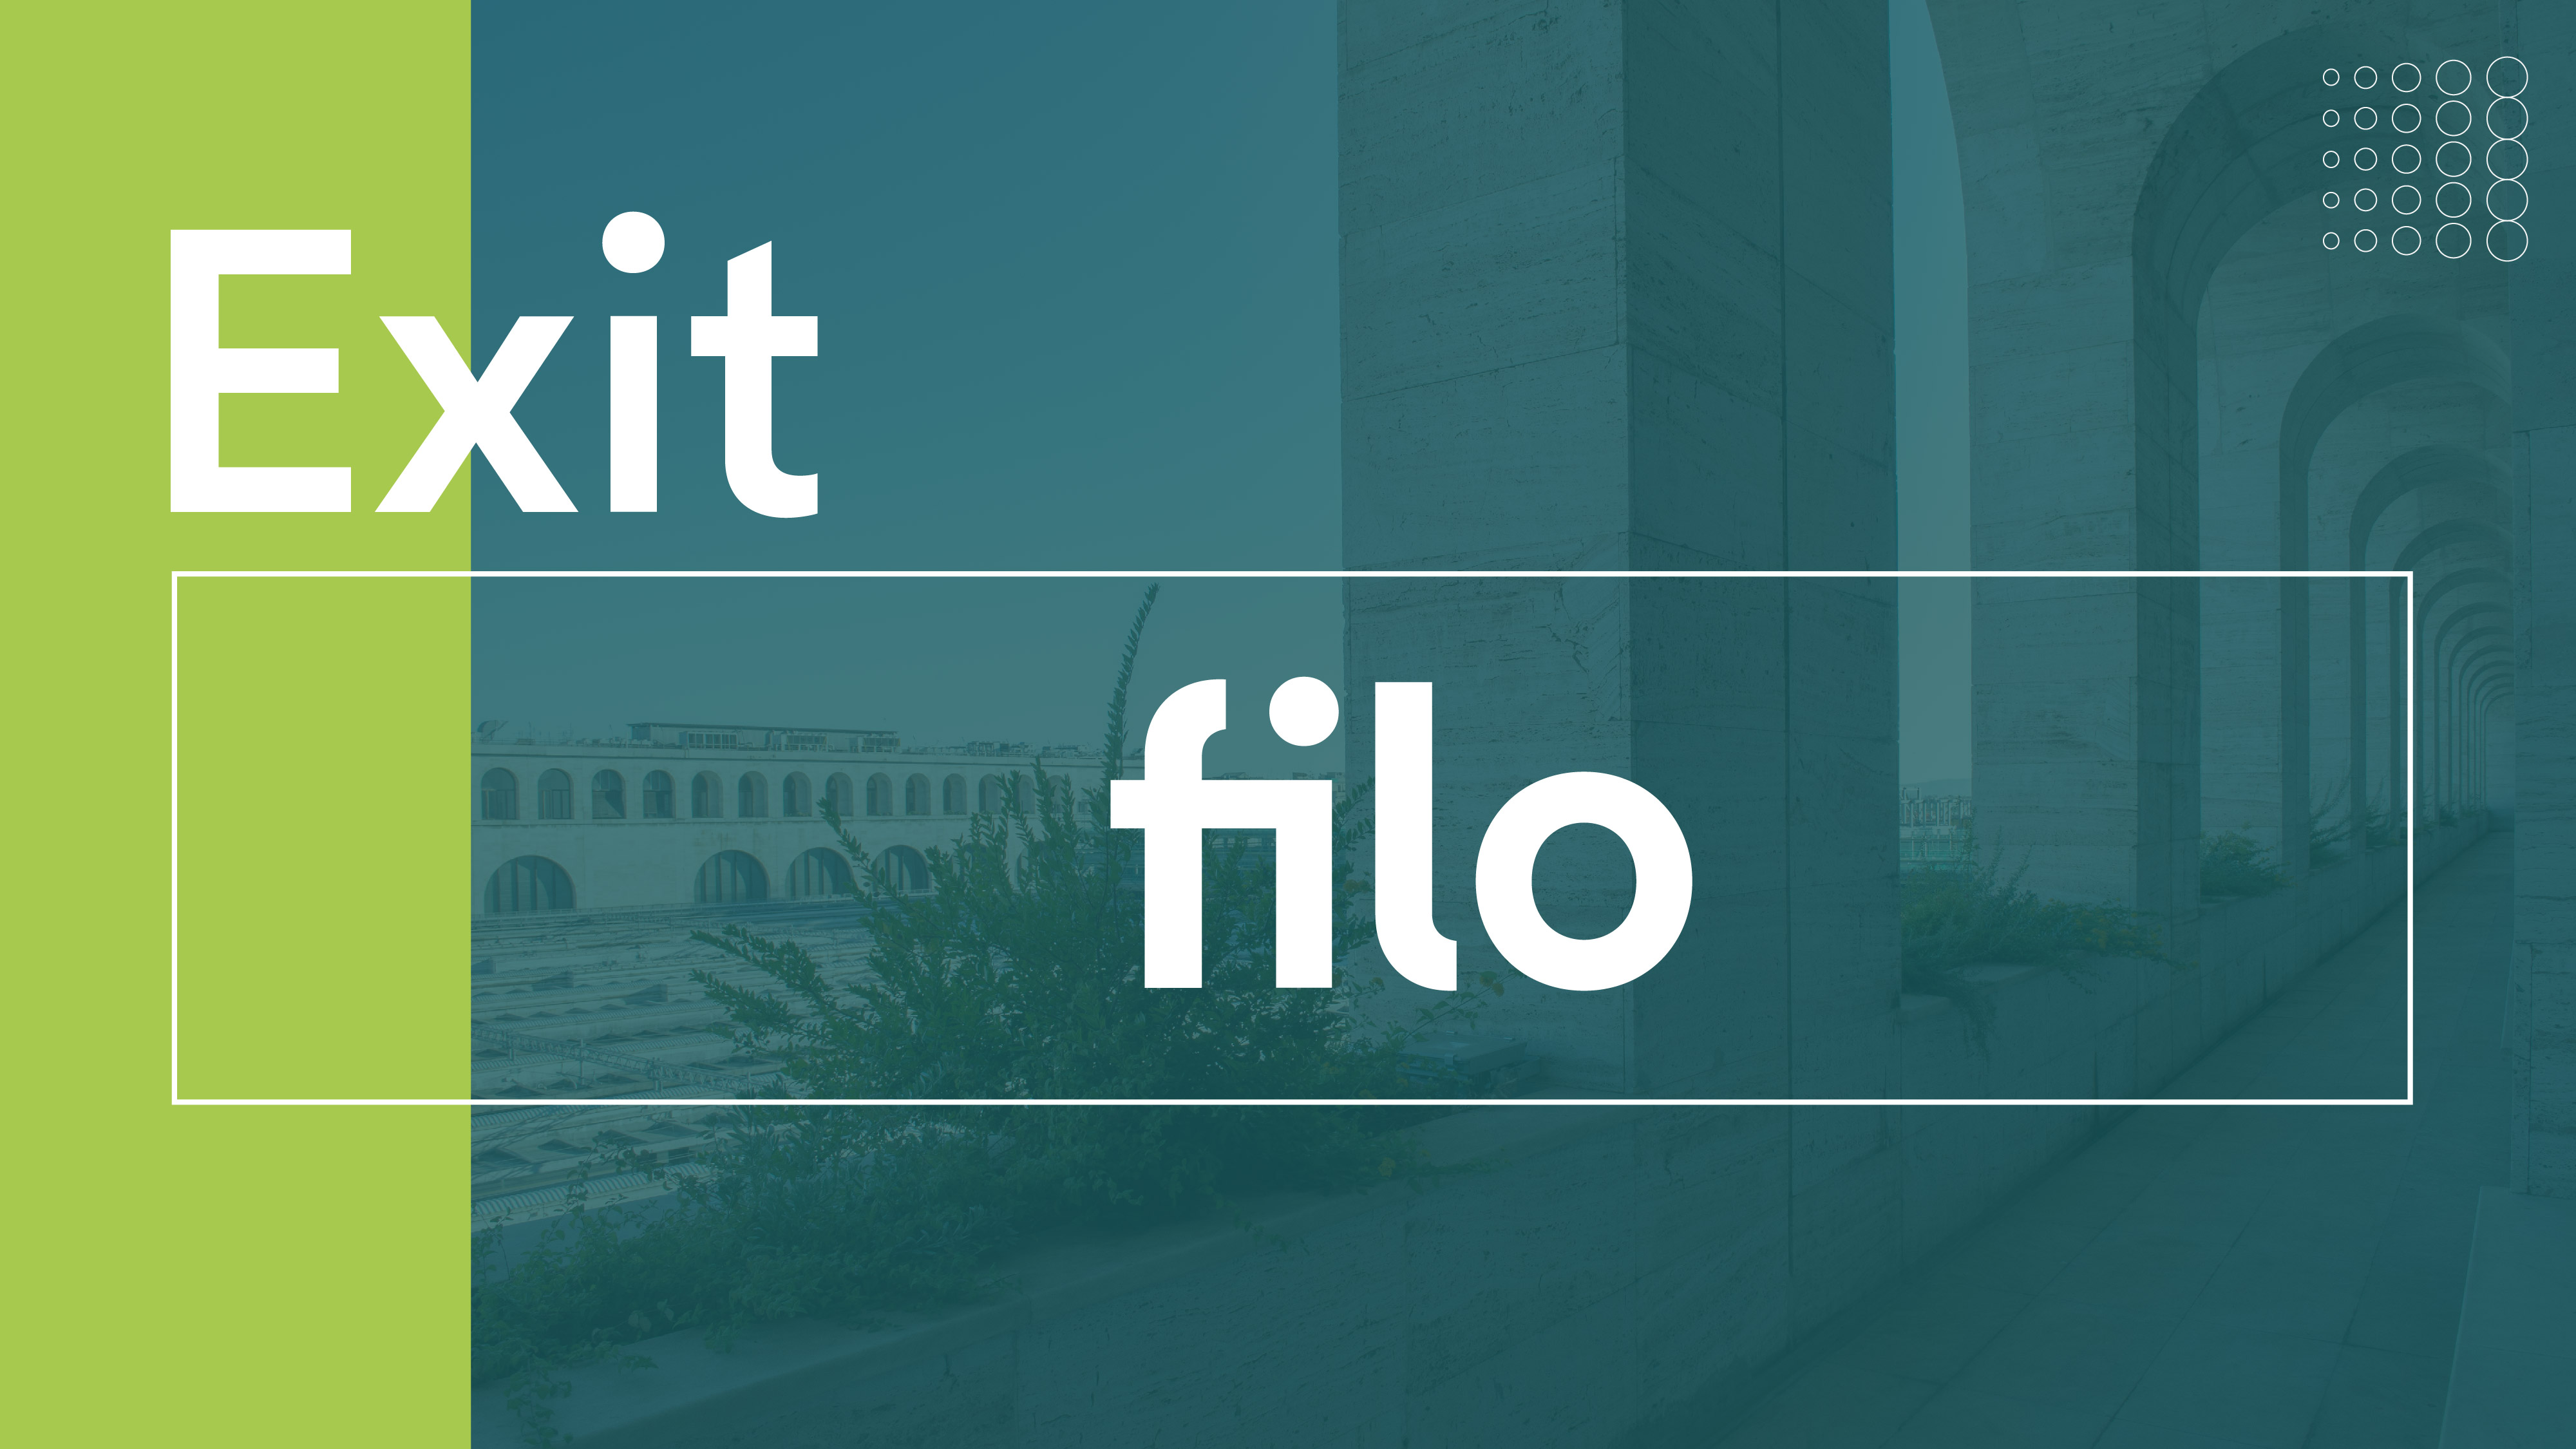 LVenture Group announces the exit from the startup Filo